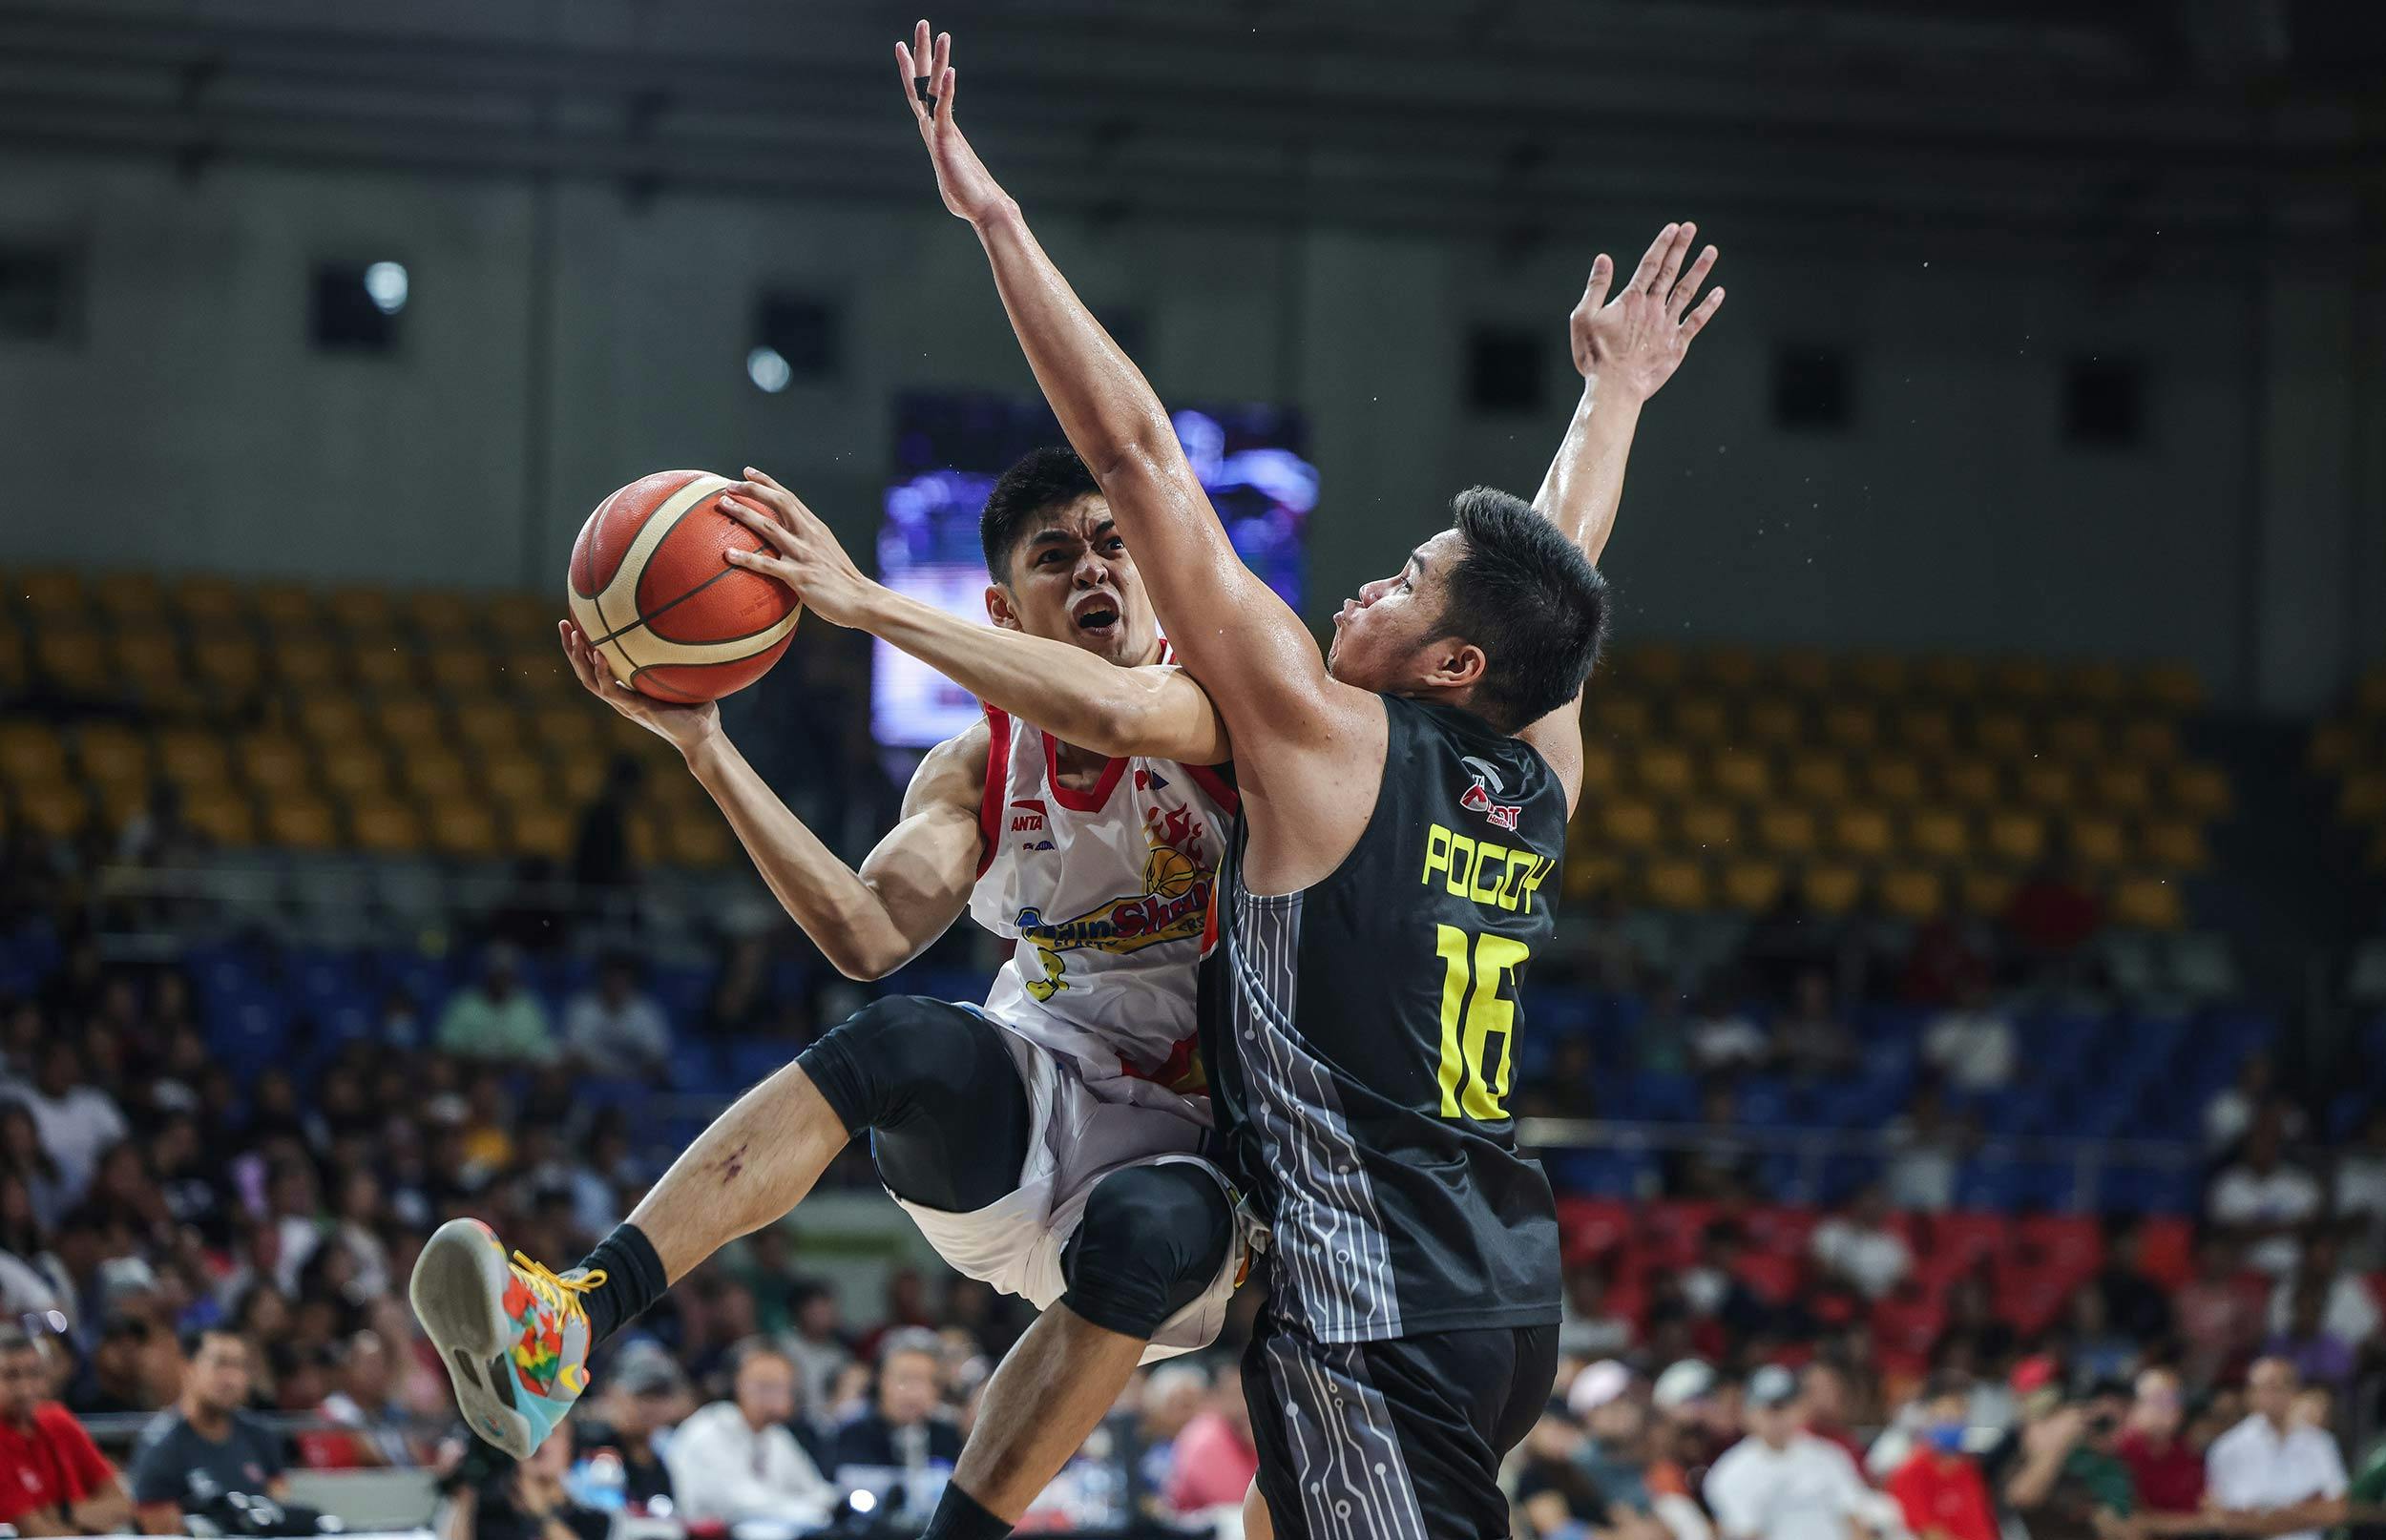 PBA: Gian Mamuyac to the rescue as Rain or Shine survives scare from TNT, advances to semis